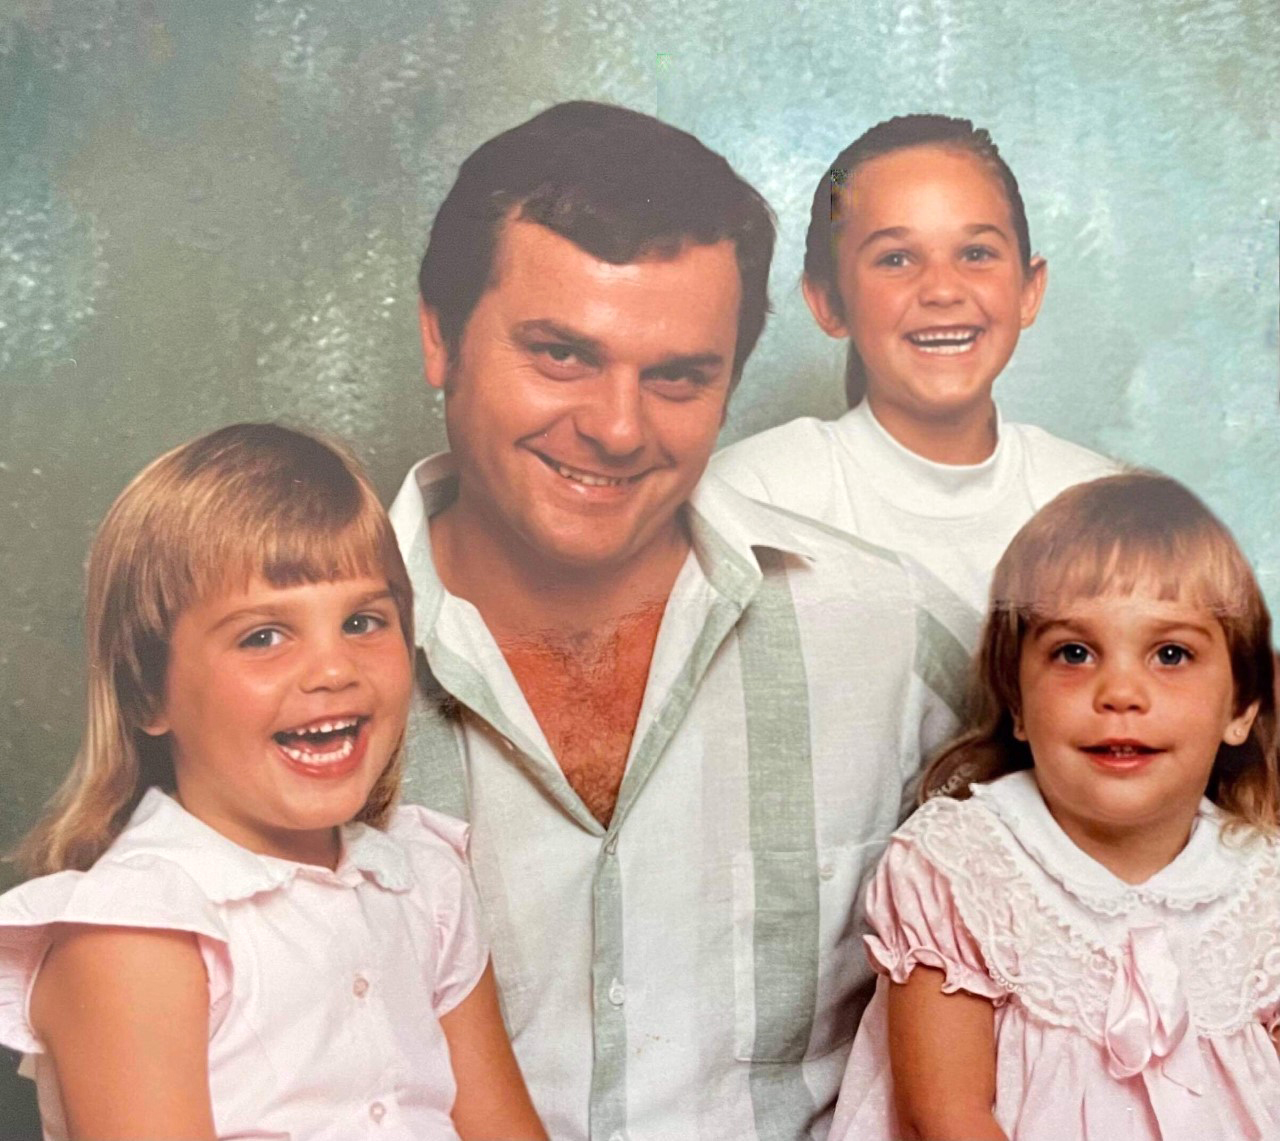 Charles Cernobori, the 59-year-old father and grandfather, pictured with his three daughters.